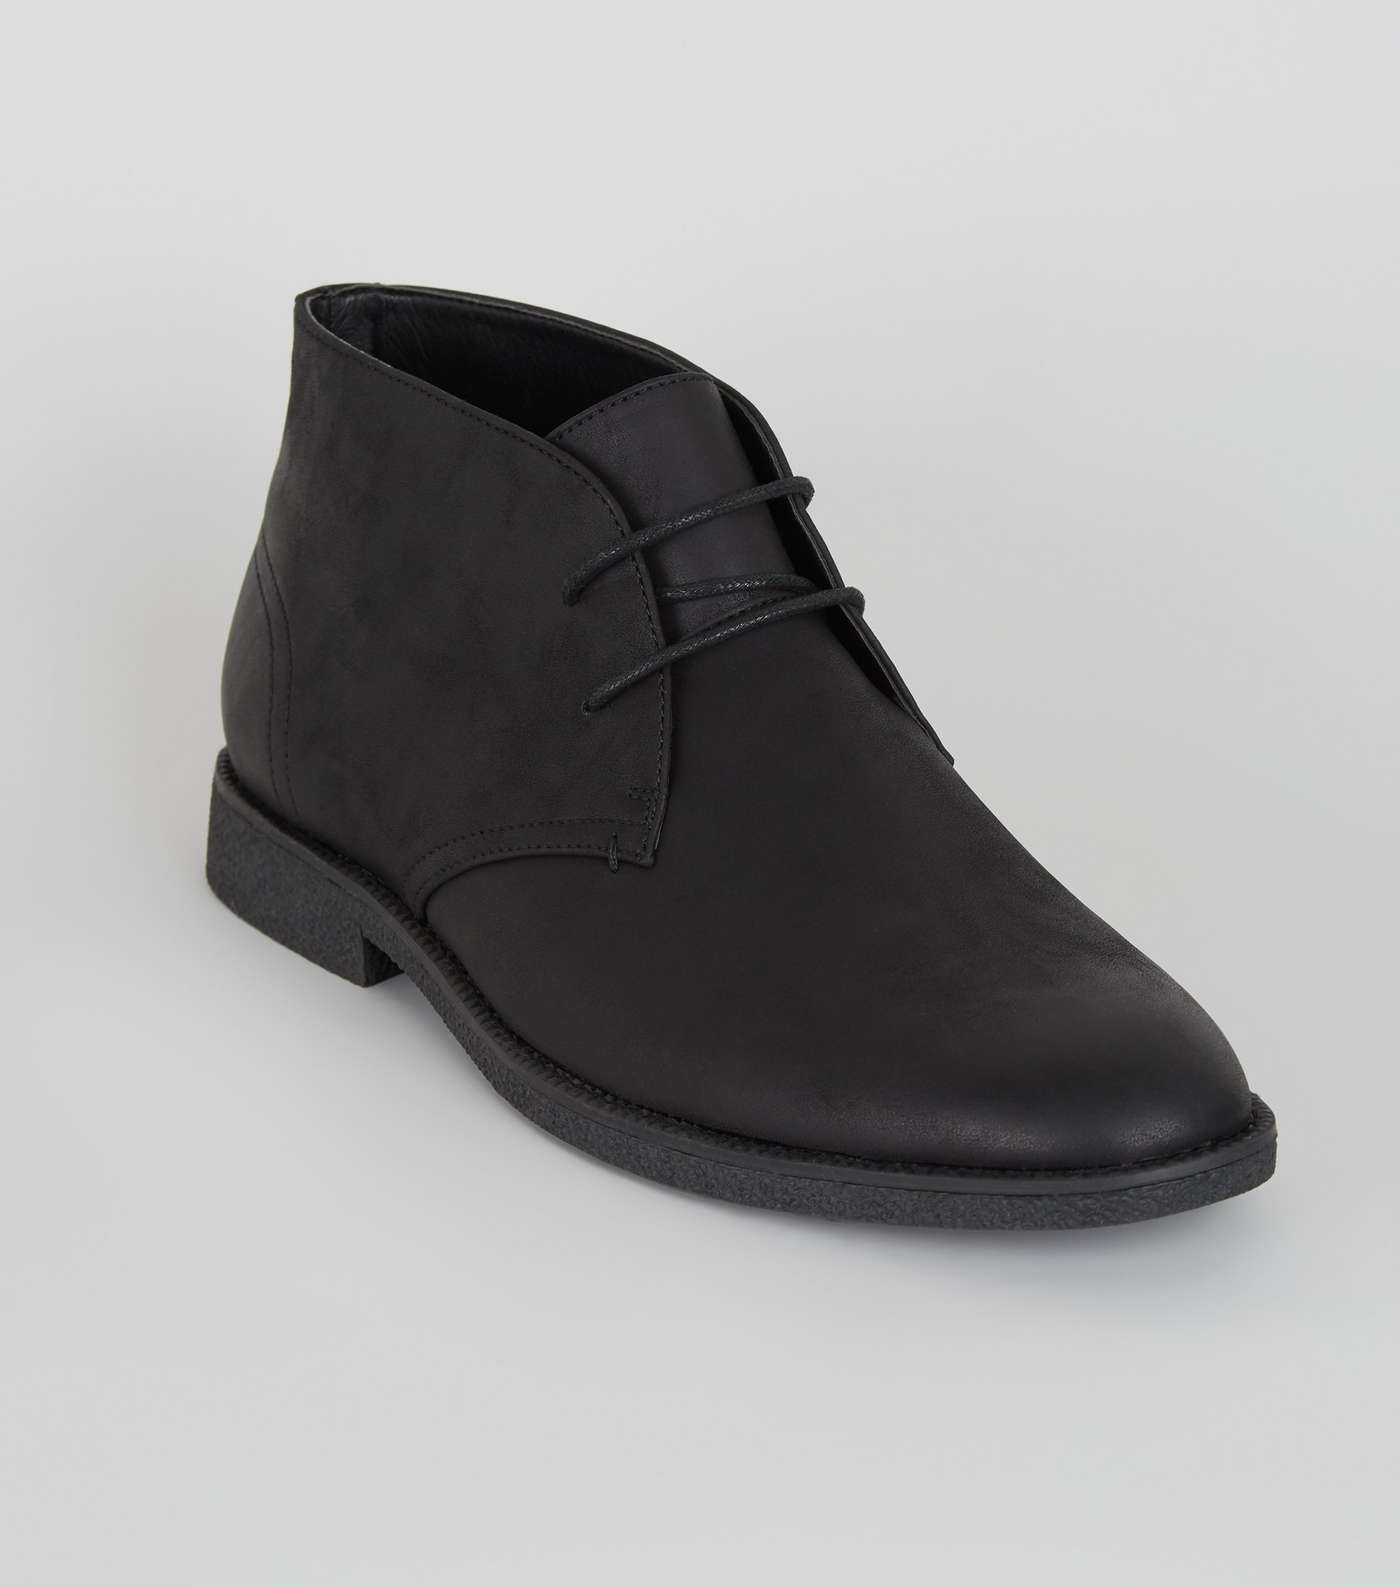 Black Leather-Look Desert Boots Image 2